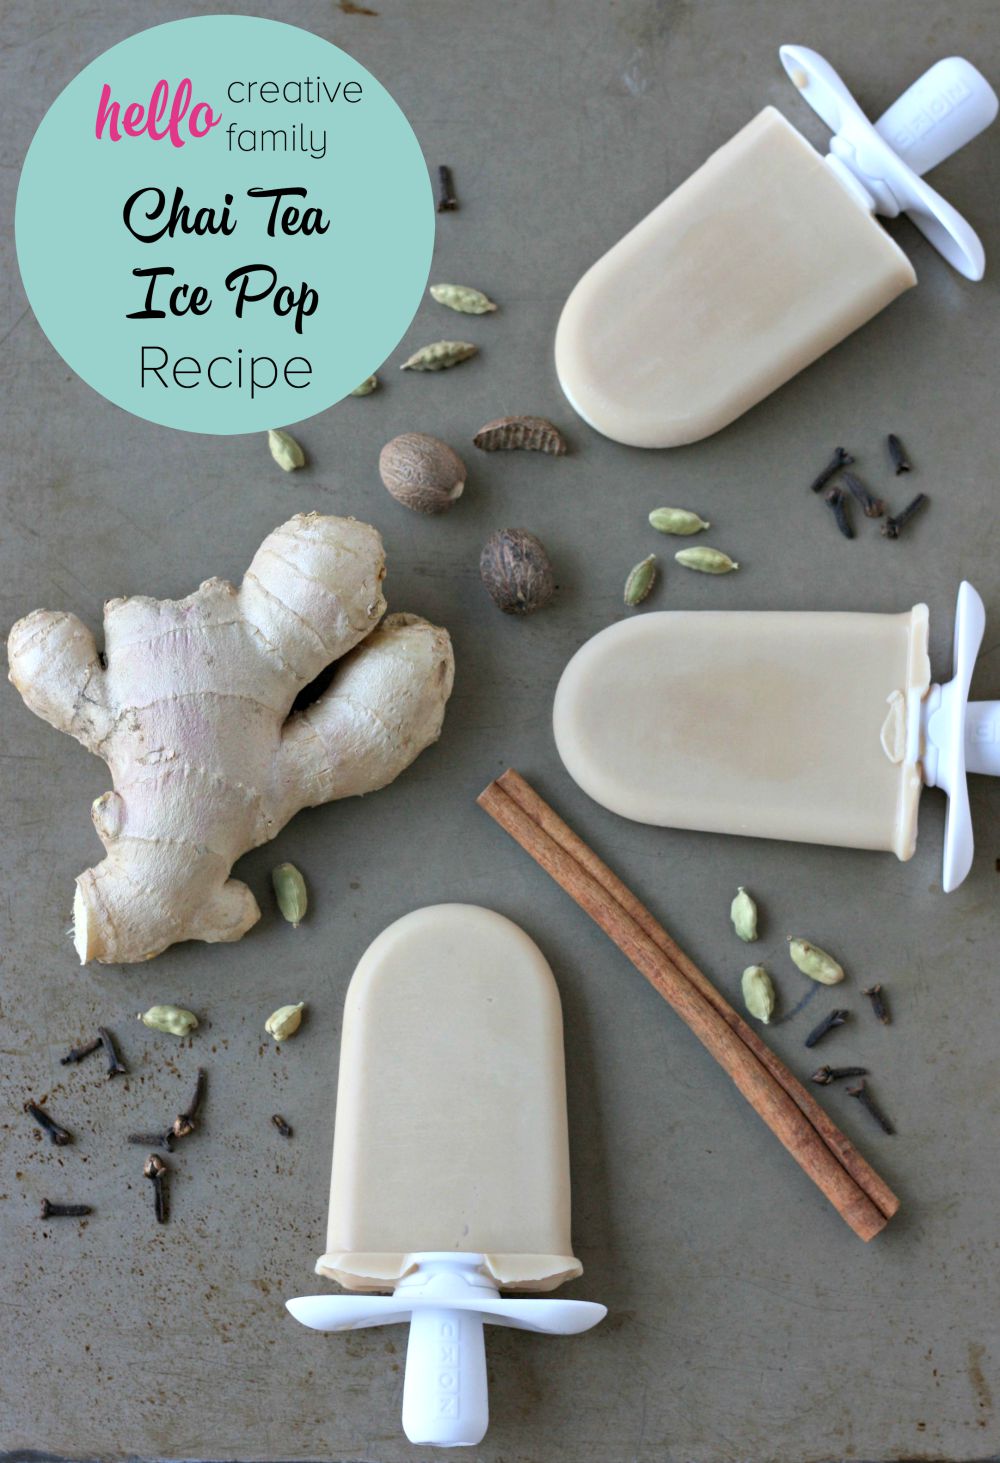 Creamy, sweet, spicy and delicious, this chai tea ice pop recipe is perfect for a hot summer day! A yummy grownup treat!